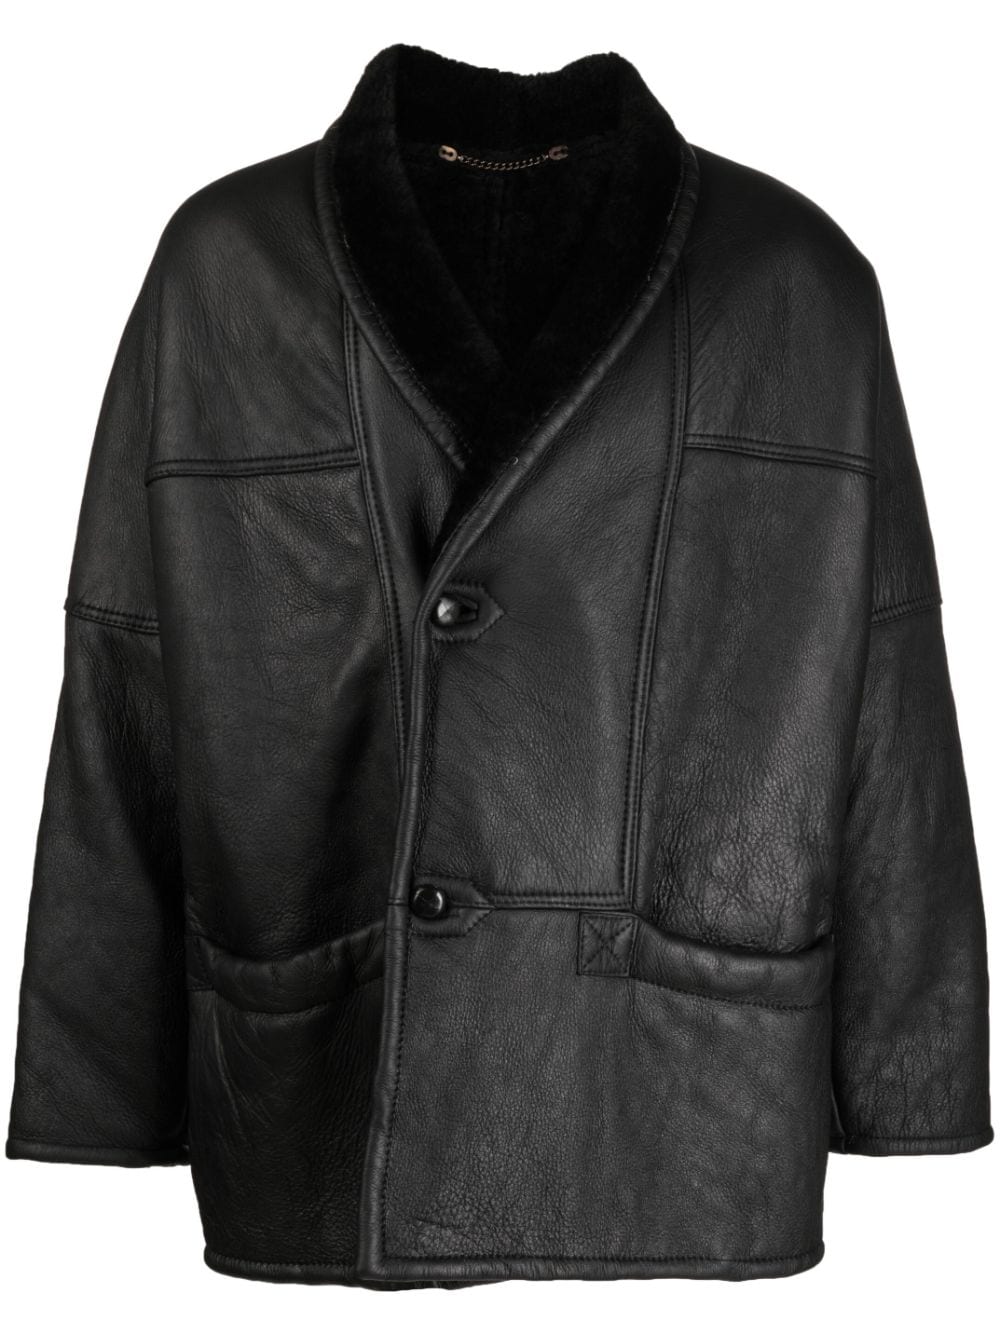 A.N.G.E.L.O. Vintage Cult 1980s shearling-lined leather coat - Black von A.N.G.E.L.O. Vintage Cult